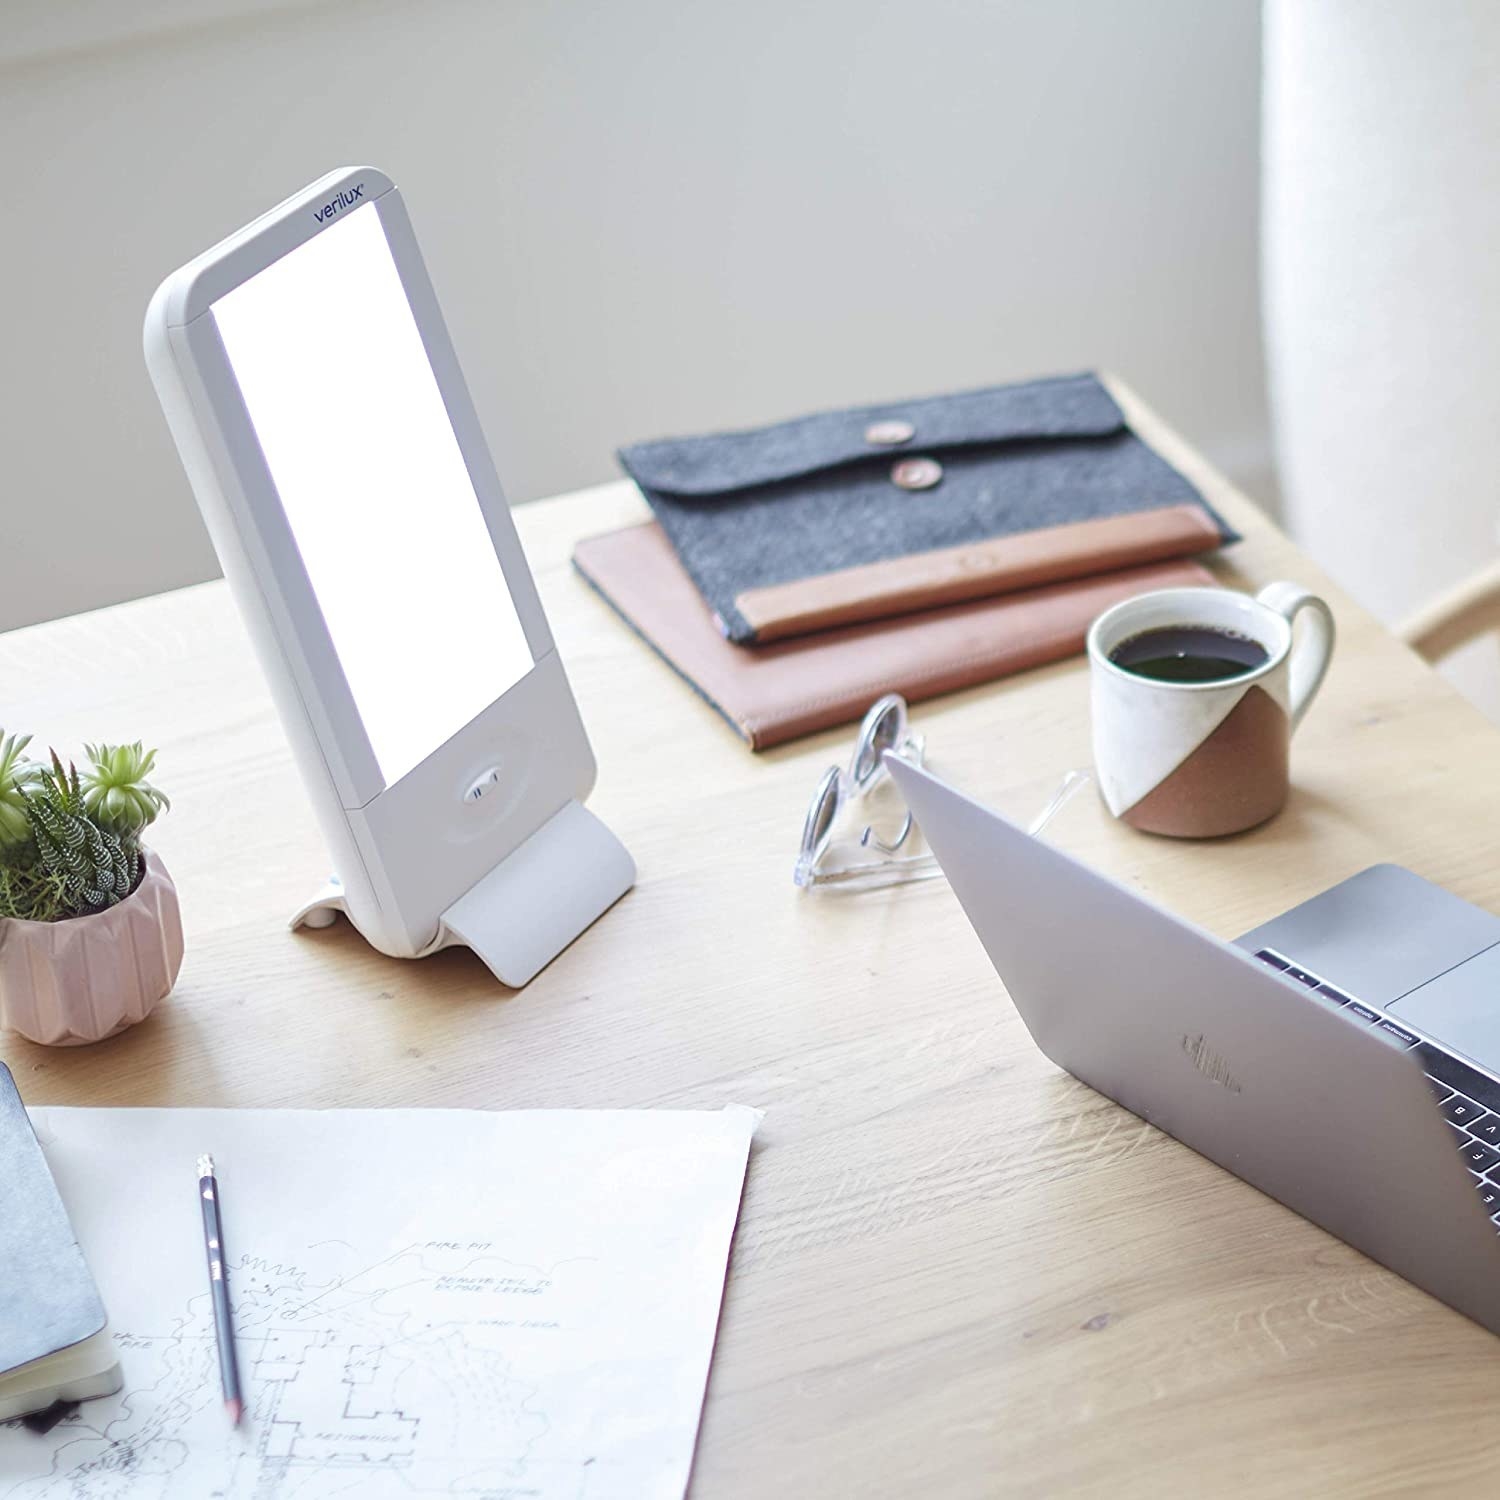 The white rectangular light on the stand (about a foot tall in total) on a desk